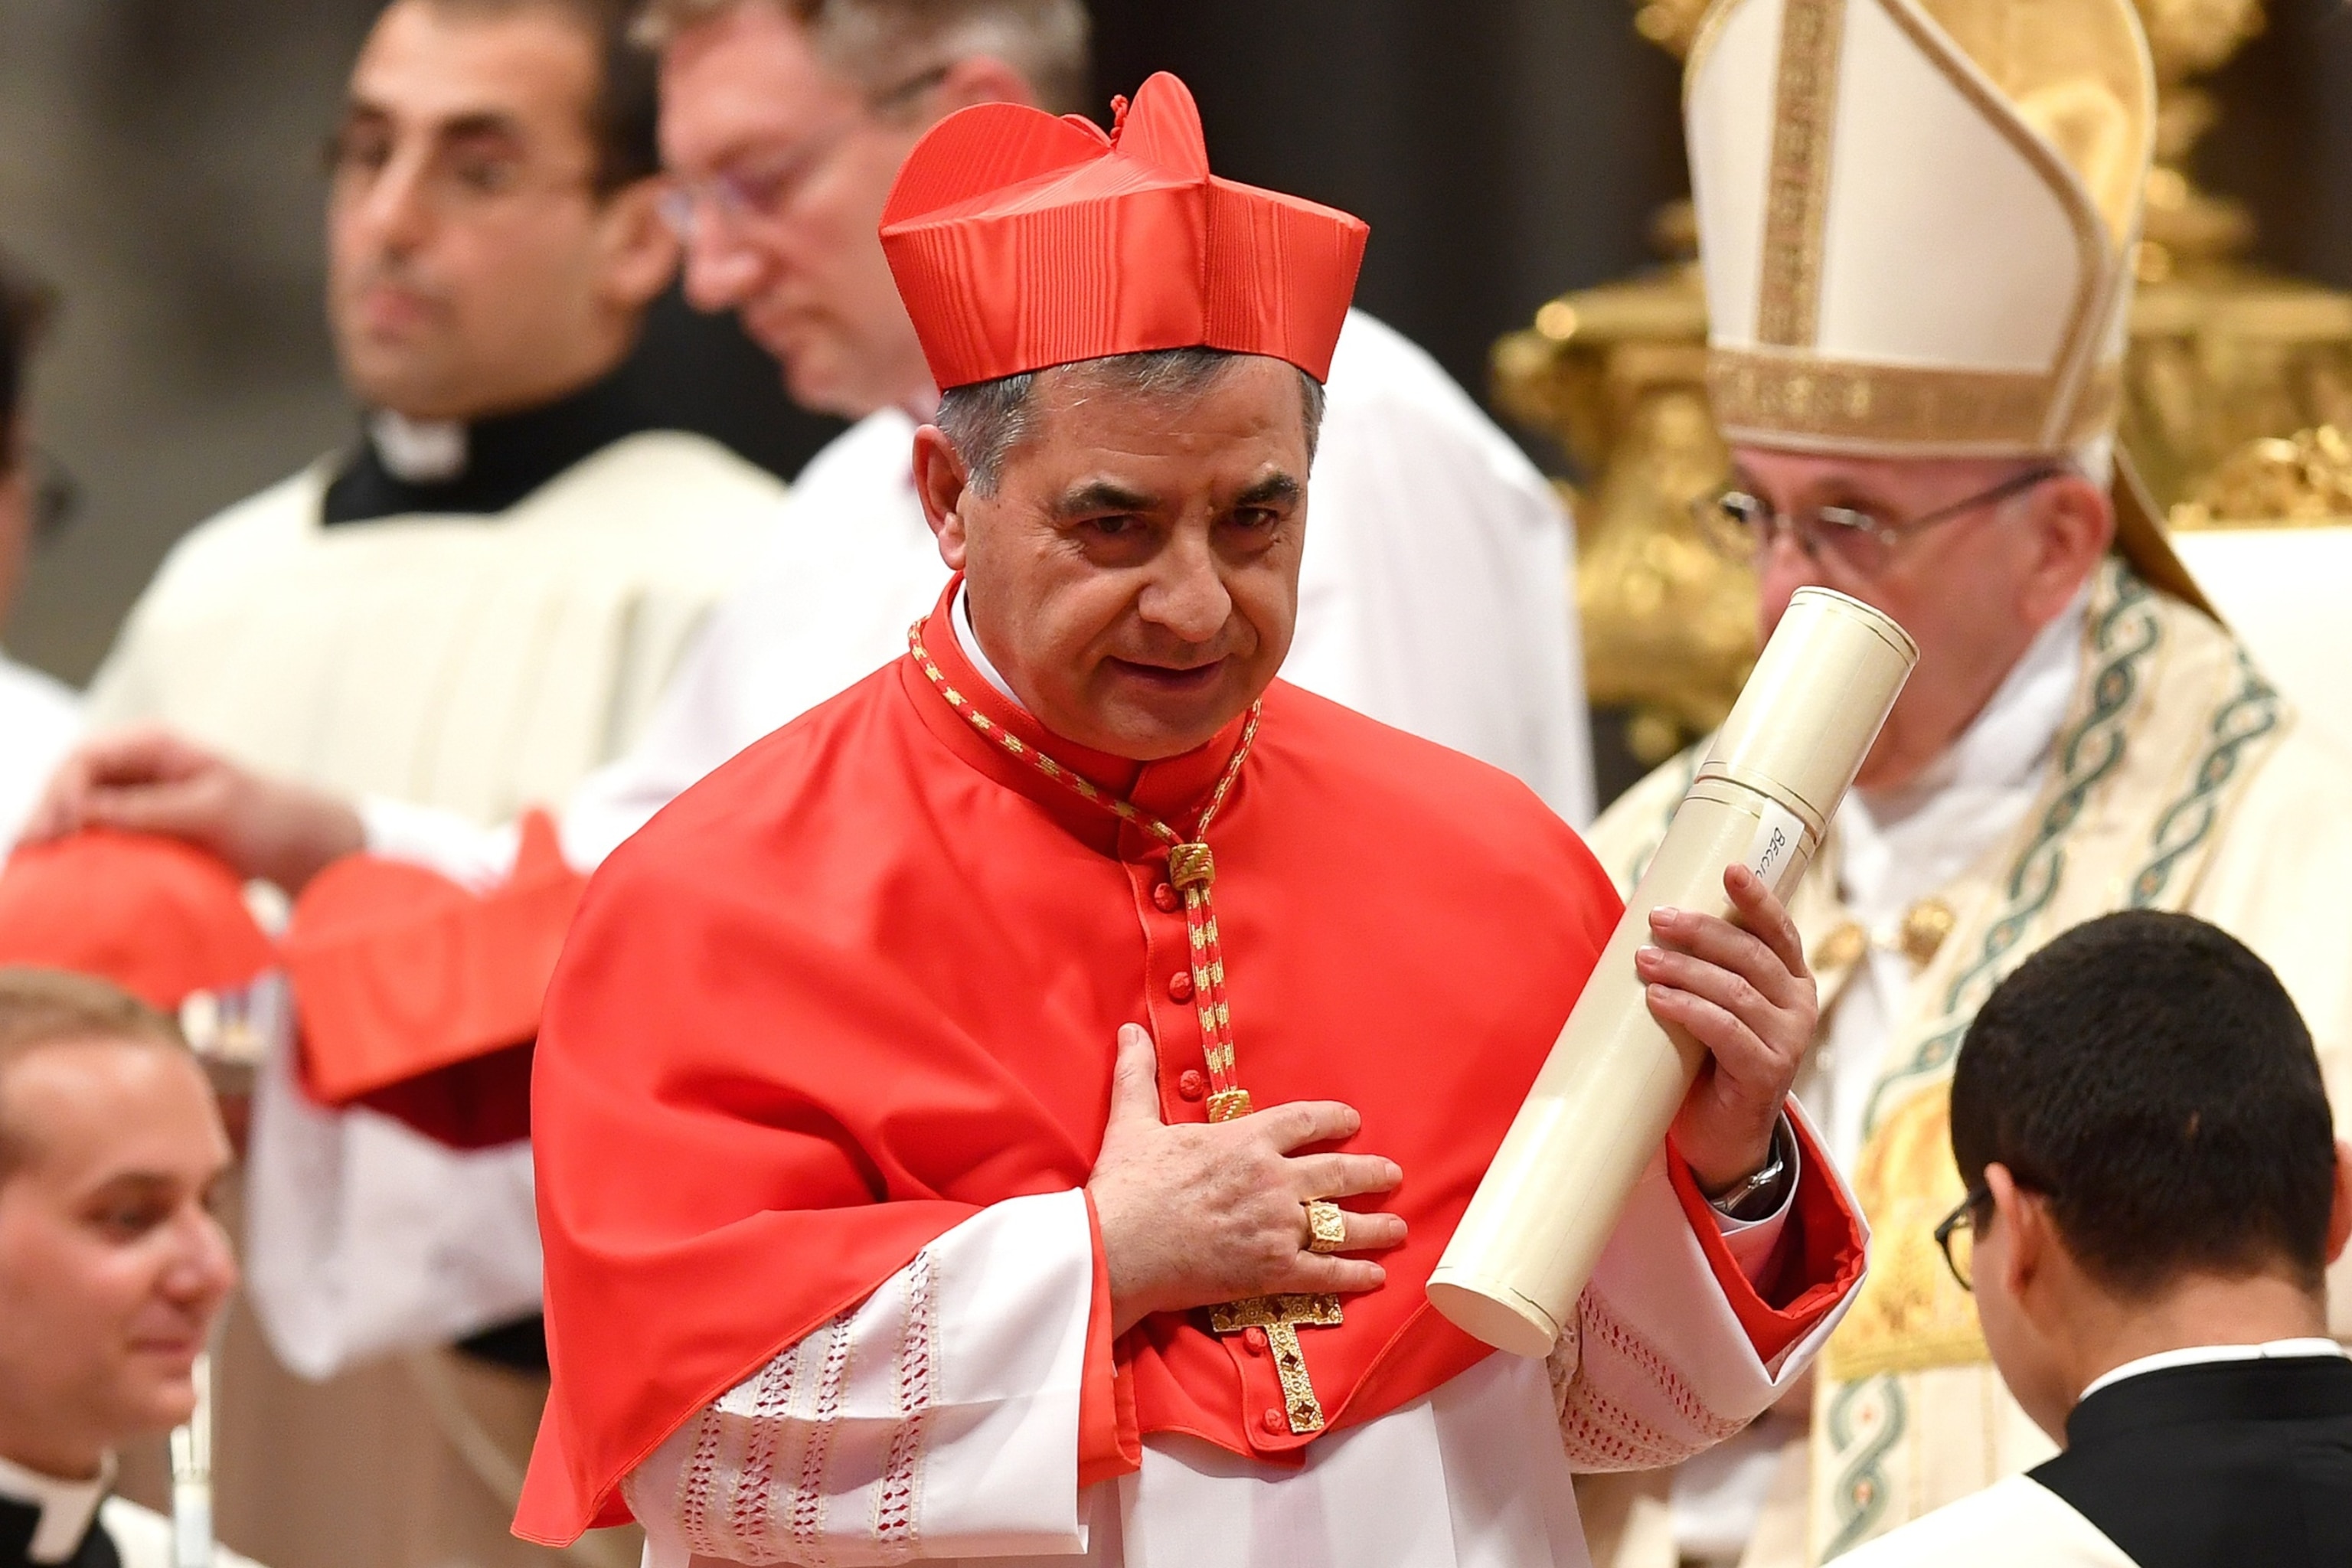 PHOTO: In this June 28, 2018 file photo, Cardinal Giovanni Angelo Becciu leaves after kneeling before Pope Francis to pledge allegiance and become a cardinal at St. Peter's basilica in Vatican City. 